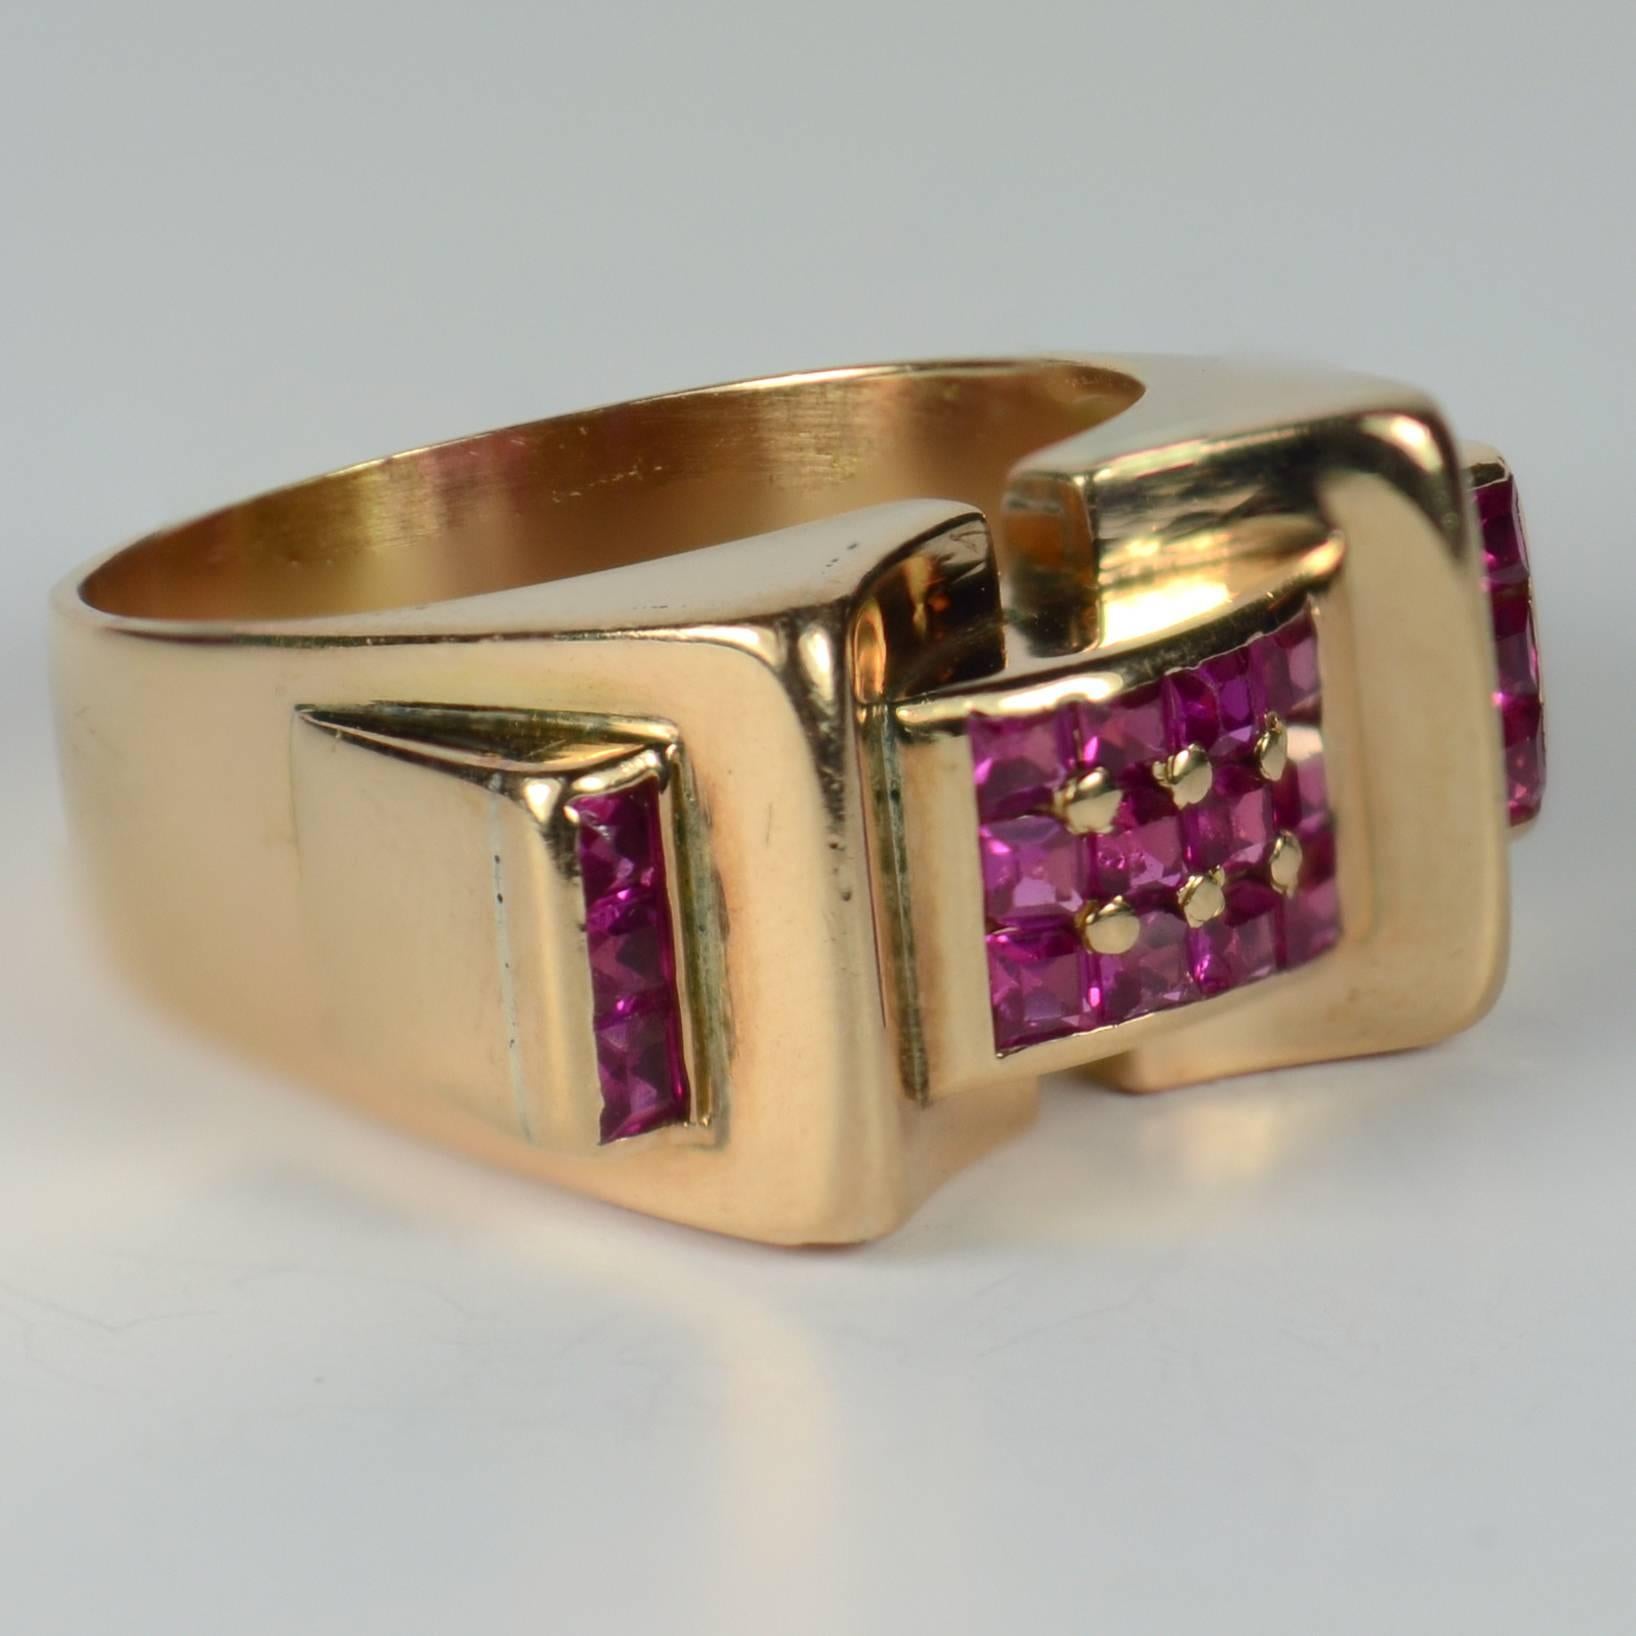 A French 18 carat gold ring in the architectural Retro style set with 18 square cut rubies totalling approximately 0.70 carats in a ‘bridge’ design.  The curve of the bridge section is interrupted by arching gold forms which continue down to form